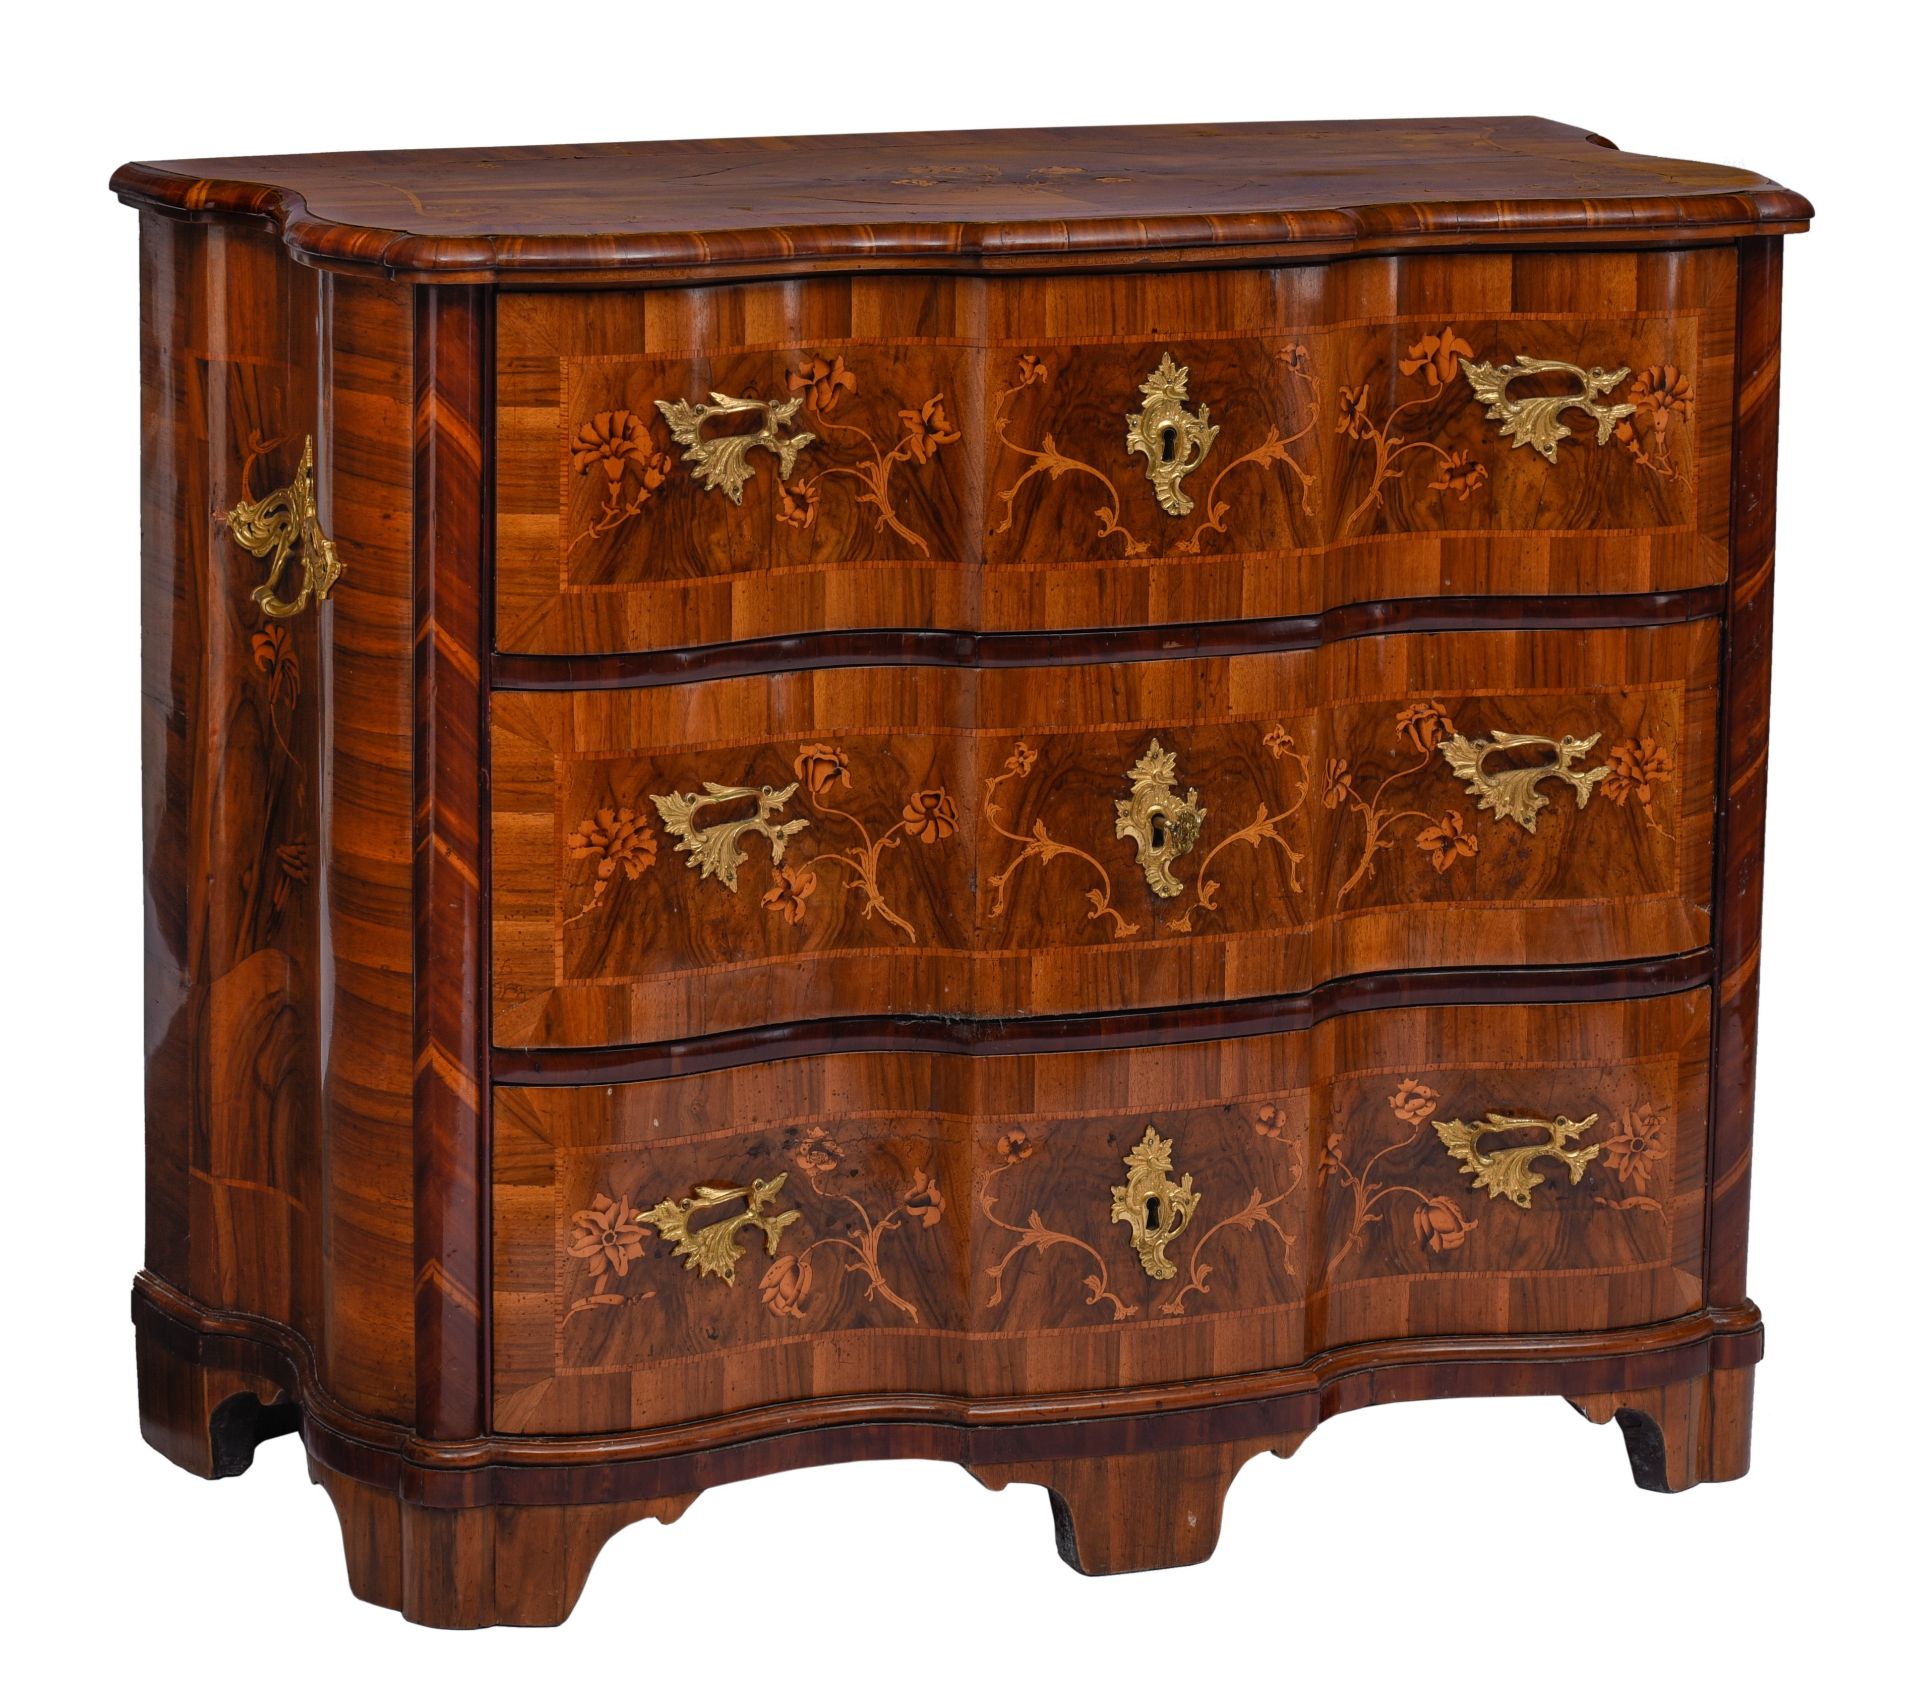 A magnificent German Rococo commode with elegant floral marquetry, mid 18thC, H 93 - W 112 - D 56 cm